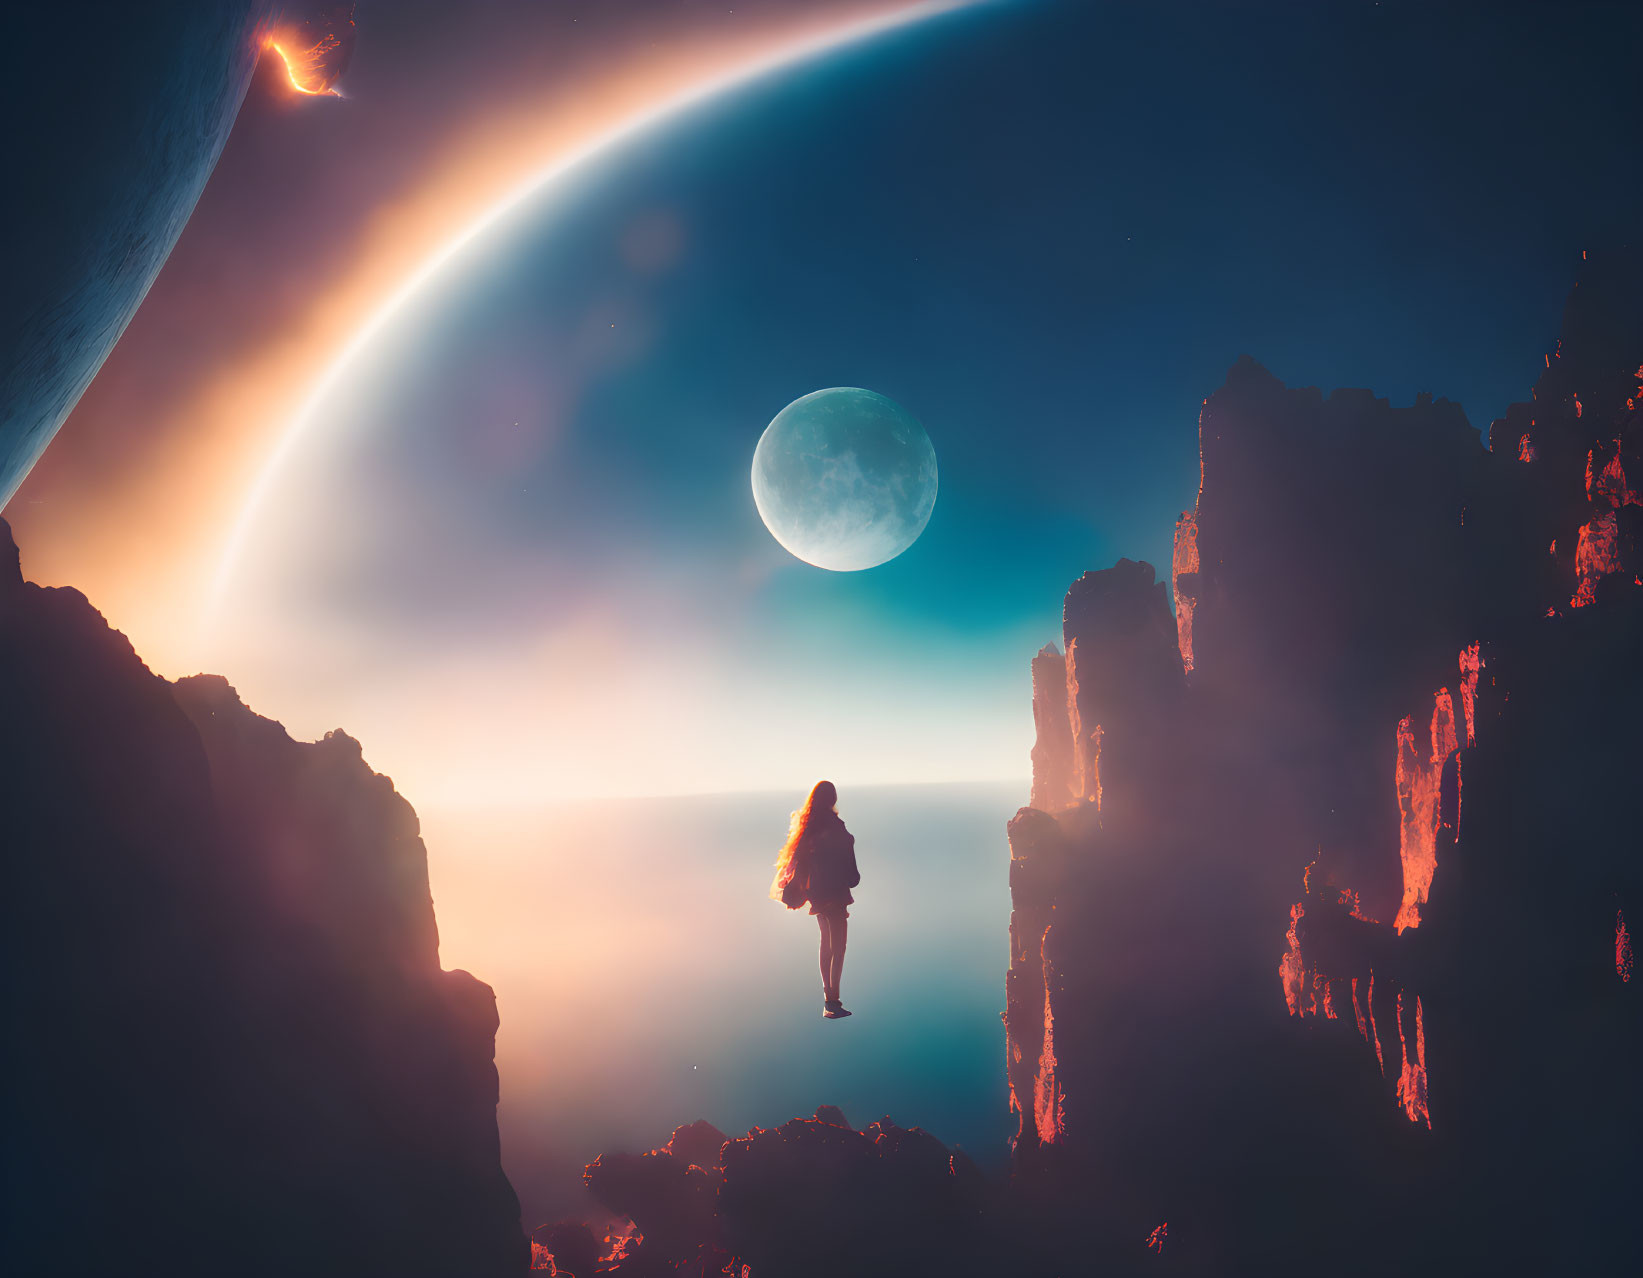 Solitary Figure on Precipice with Surreal Planetary Backdrop